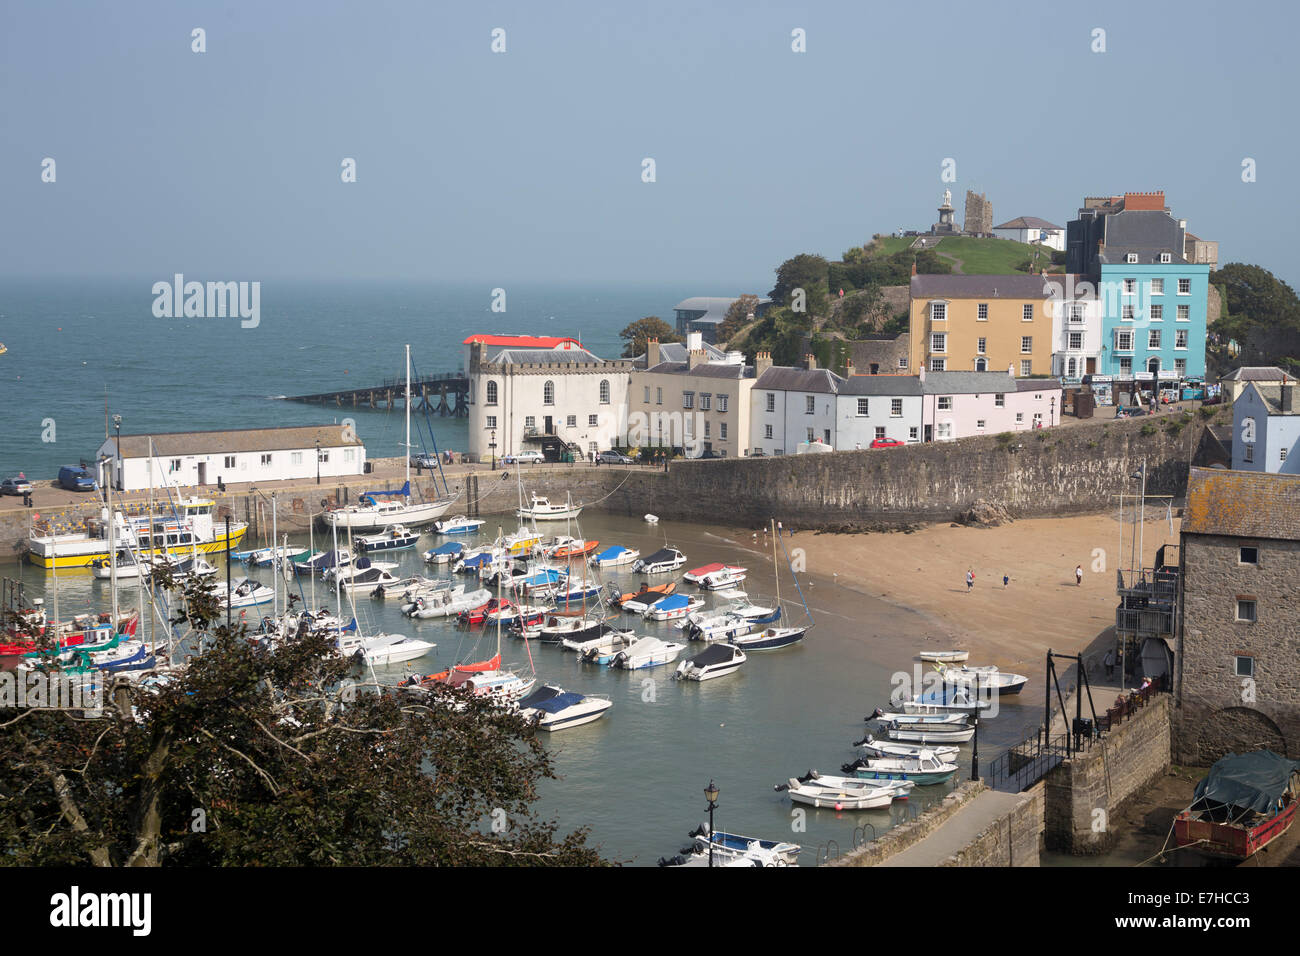 Tenby harbour, south Wales. Boats in the harbour. Stock Photo